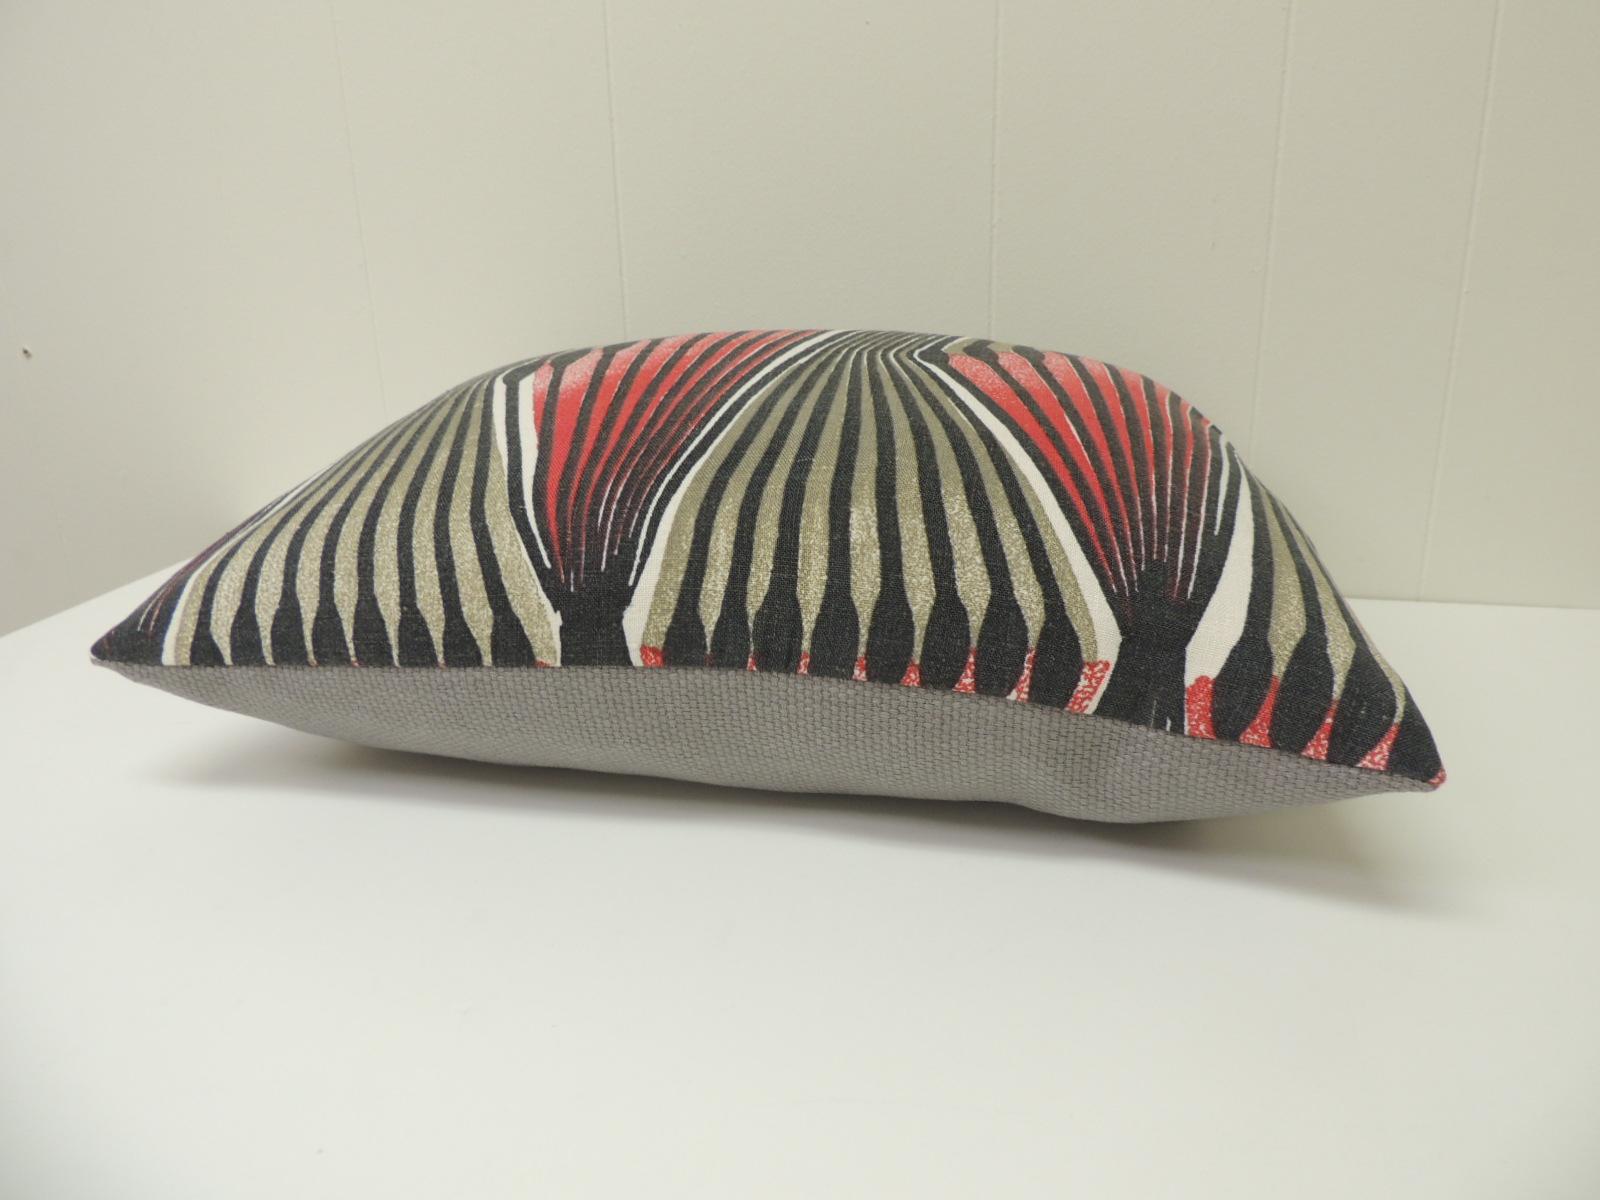 Art Deco Vintage Red and Grey Modern Swedish Decorative Bolster Pillow